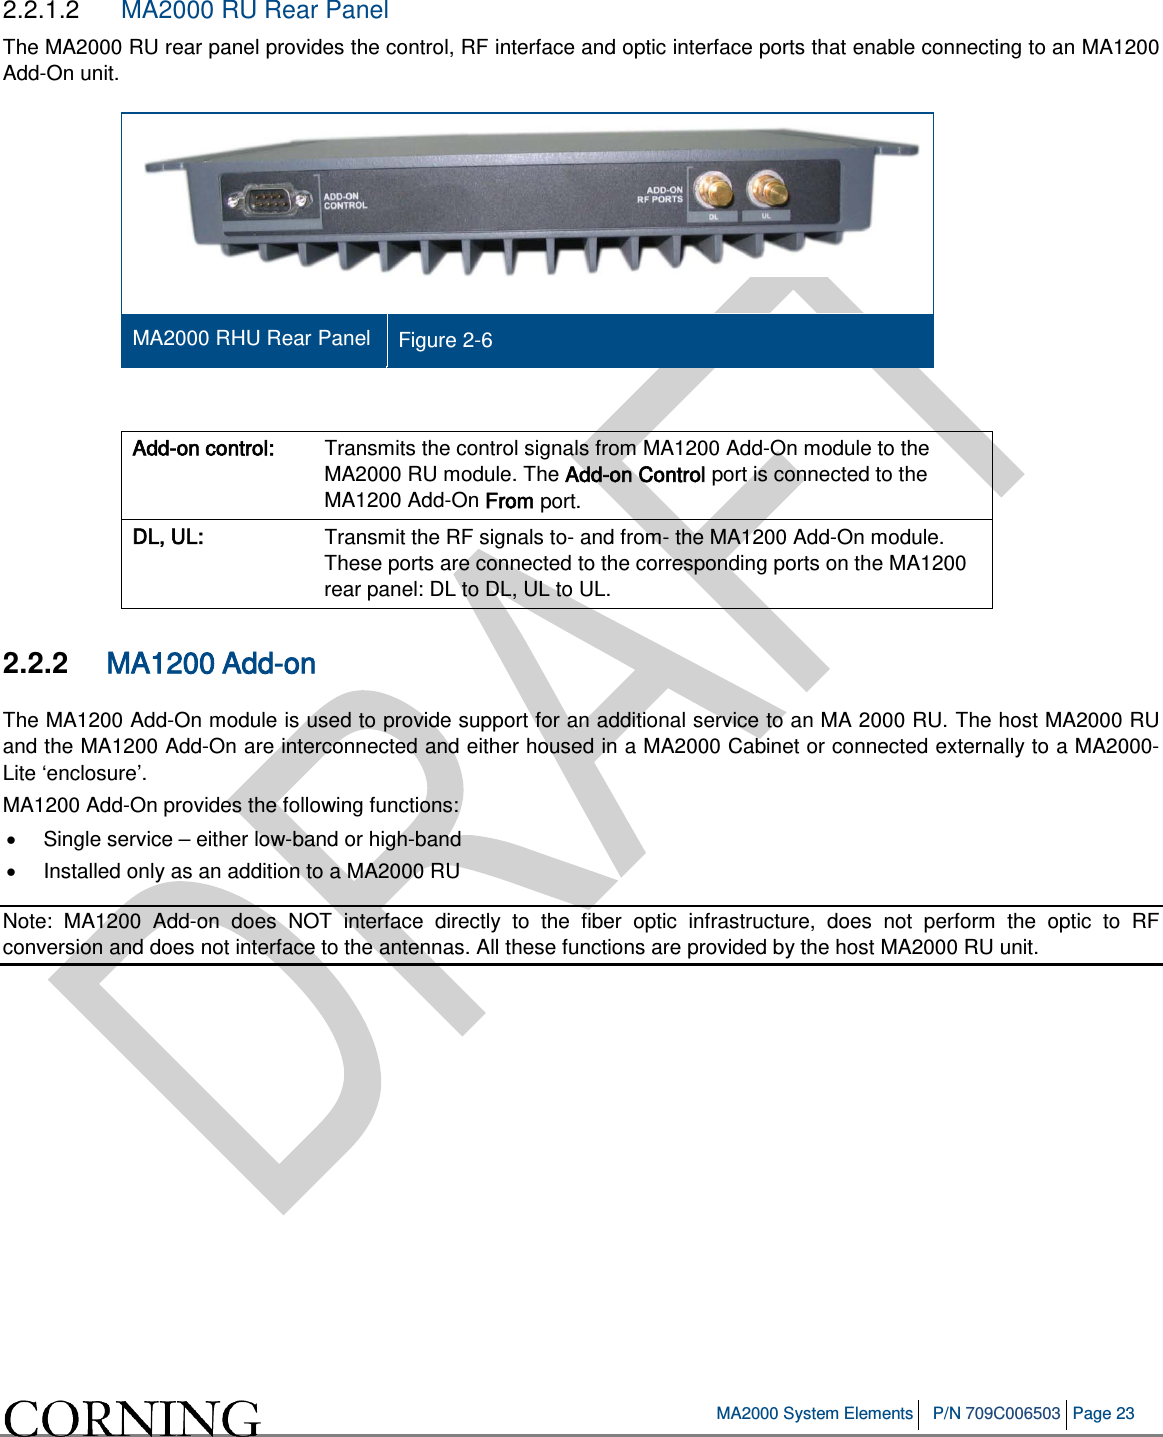   MA2000 System Elements P/N 709C006503 Page 23   2.2.1.2  MA2000 RU Rear Panel The MA2000 RU rear panel provides the control, RF interface and optic interface ports that enable connecting to an MA1200 Add-On unit.   MA2000 RHU Rear Panel Figure  2-6  Add-on control: Transmits the control signals from MA1200 Add-On module to the MA2000 RU module. The Add-on Control port is connected to the MA1200 Add-On From port.  DL, UL: Transmit the RF signals to- and from- the MA1200 Add-On module. These ports are connected to the corresponding ports on the MA1200 rear panel: DL to DL, UL to UL. 2.2.2  MA1200 Add-on The MA1200 Add-On module is used to provide support for an additional service to an MA 2000 RU. The host MA2000 RU and the MA1200 Add-On are interconnected and either housed in a MA2000 Cabinet or connected externally to a MA2000-Lite ‘enclosure’.  MA1200 Add-On provides the following functions: •  Single service – either low-band or high-band • Installed only as an addition to a MA2000 RU Note:  MA1200  Add-on does NOT interface directly to the fiber optic infrastructure, does not perform the optic to RF conversion and does not interface to the antennas. All these functions are provided by the host MA2000 RU unit.     